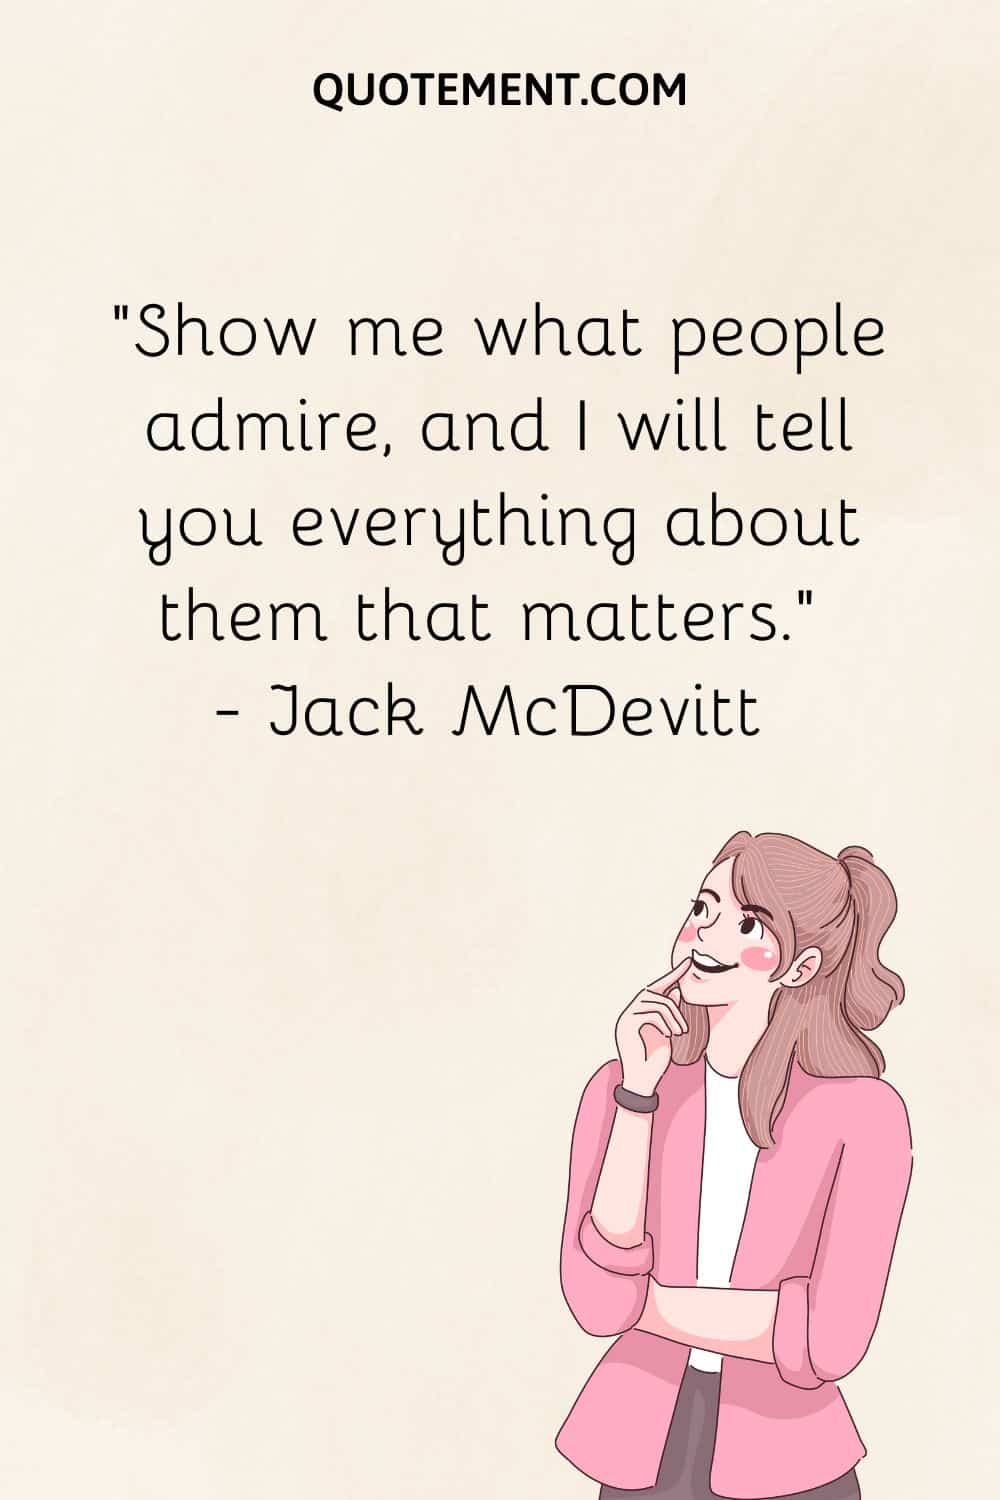 Show me what people admire, and I will tell you everything about them that matters